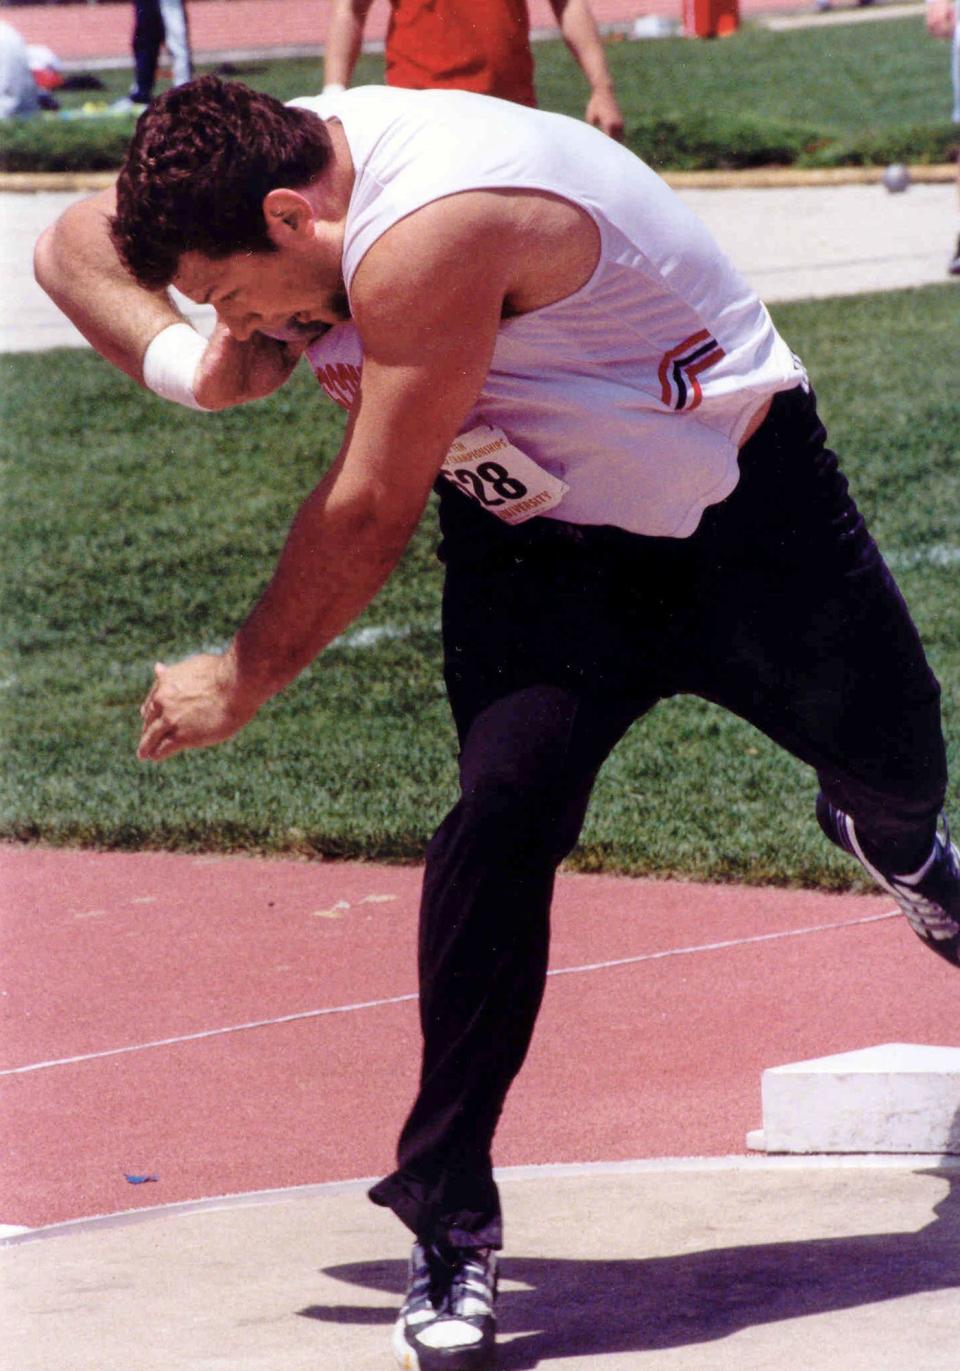 Former Cleveland Browns left tackle Joe Thomas throws the shot put during his track and field days at the University of Wisconsin. Thomas believes shot-putting helped him develop into an elite pass blocker in the NFL.